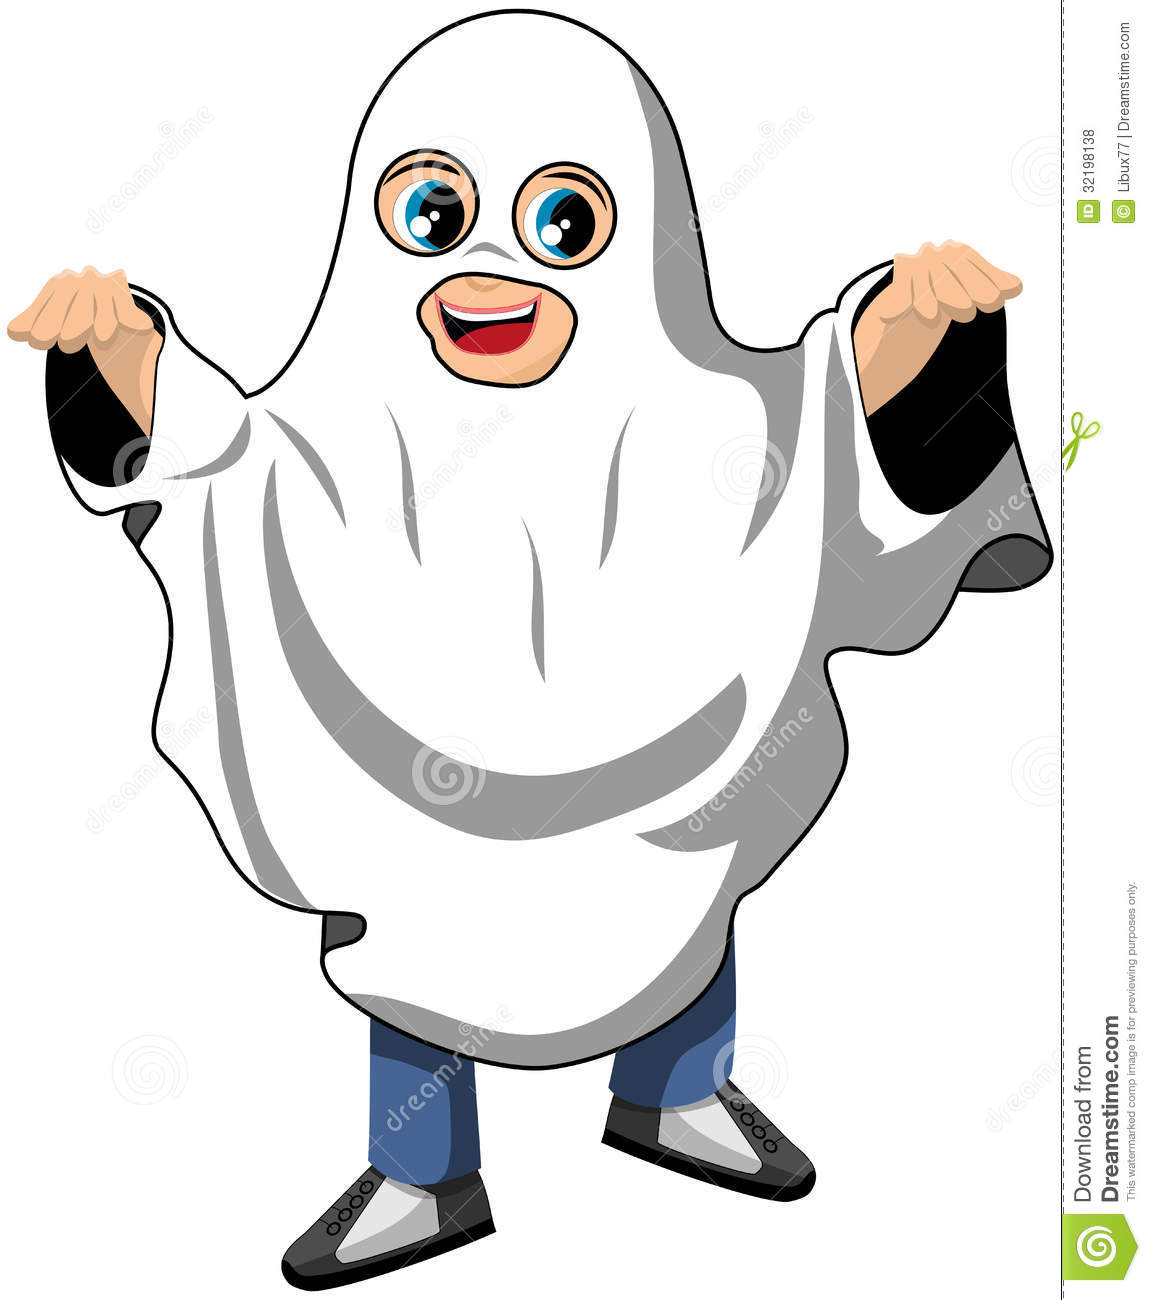 Illustration Featuring A Smiling Boy Wearing Halloween Ghost Costume